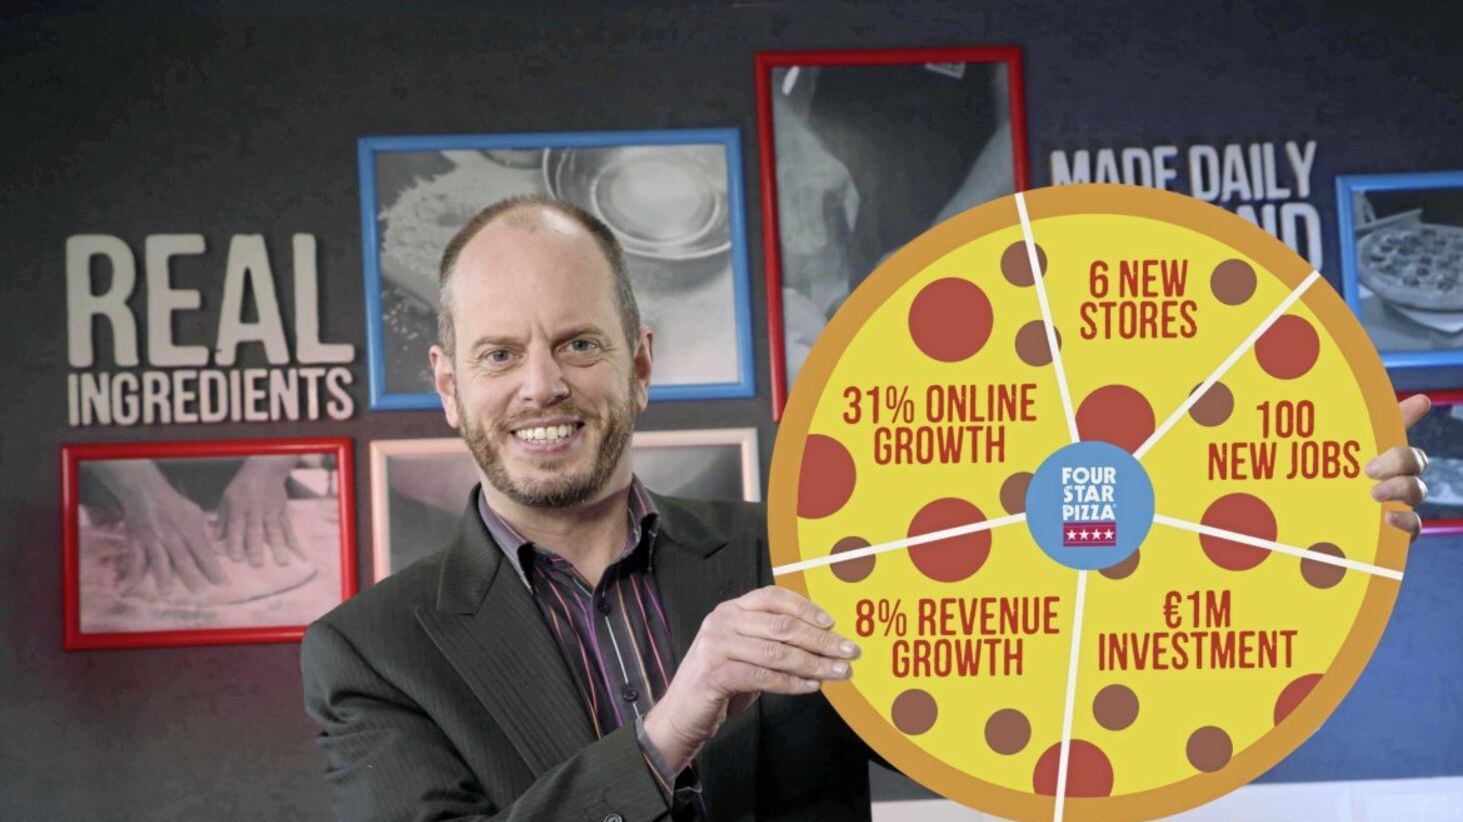 Four Star Pizza director Brian Clarke celebrates a record year for the Irish-owned pizza chain 